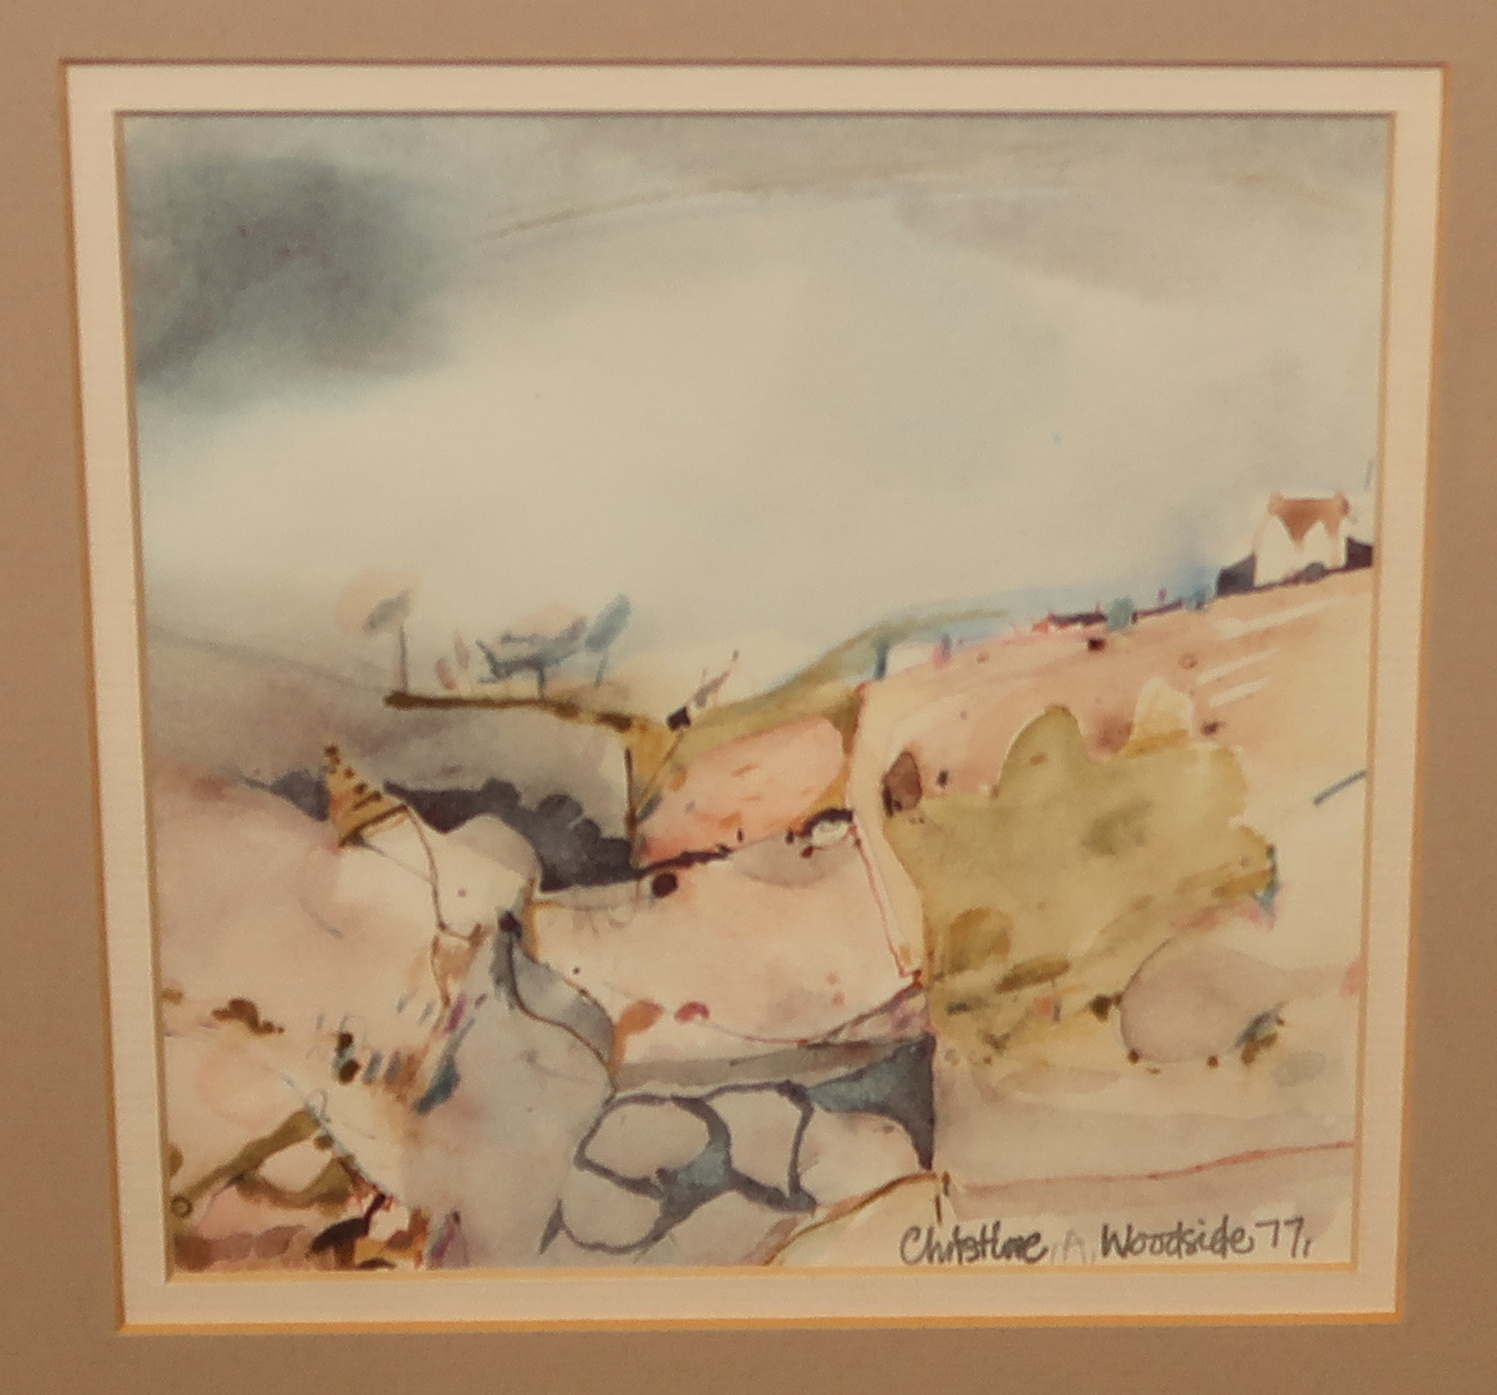 CHRISTINE E WOODSIDE Landscape, signed, watercolour, dated, (19)77, 15 x 16cm another landscape, - Image 2 of 3